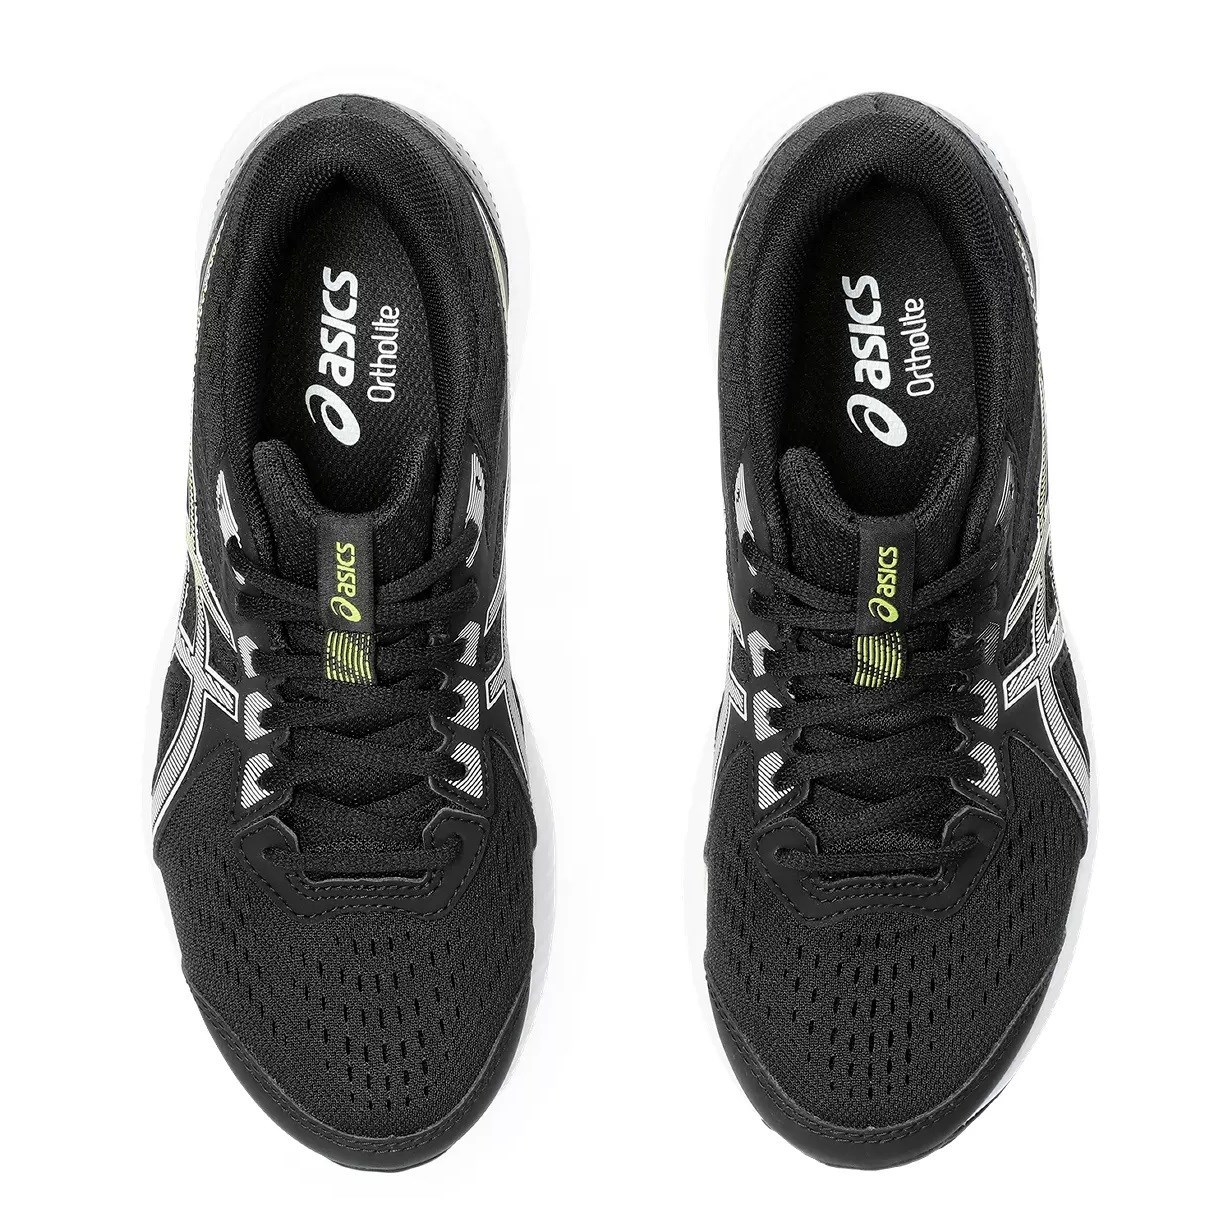 Asics Gel Contend 8 - Womens Running Shoes - Black/Cosmos | Sportitude